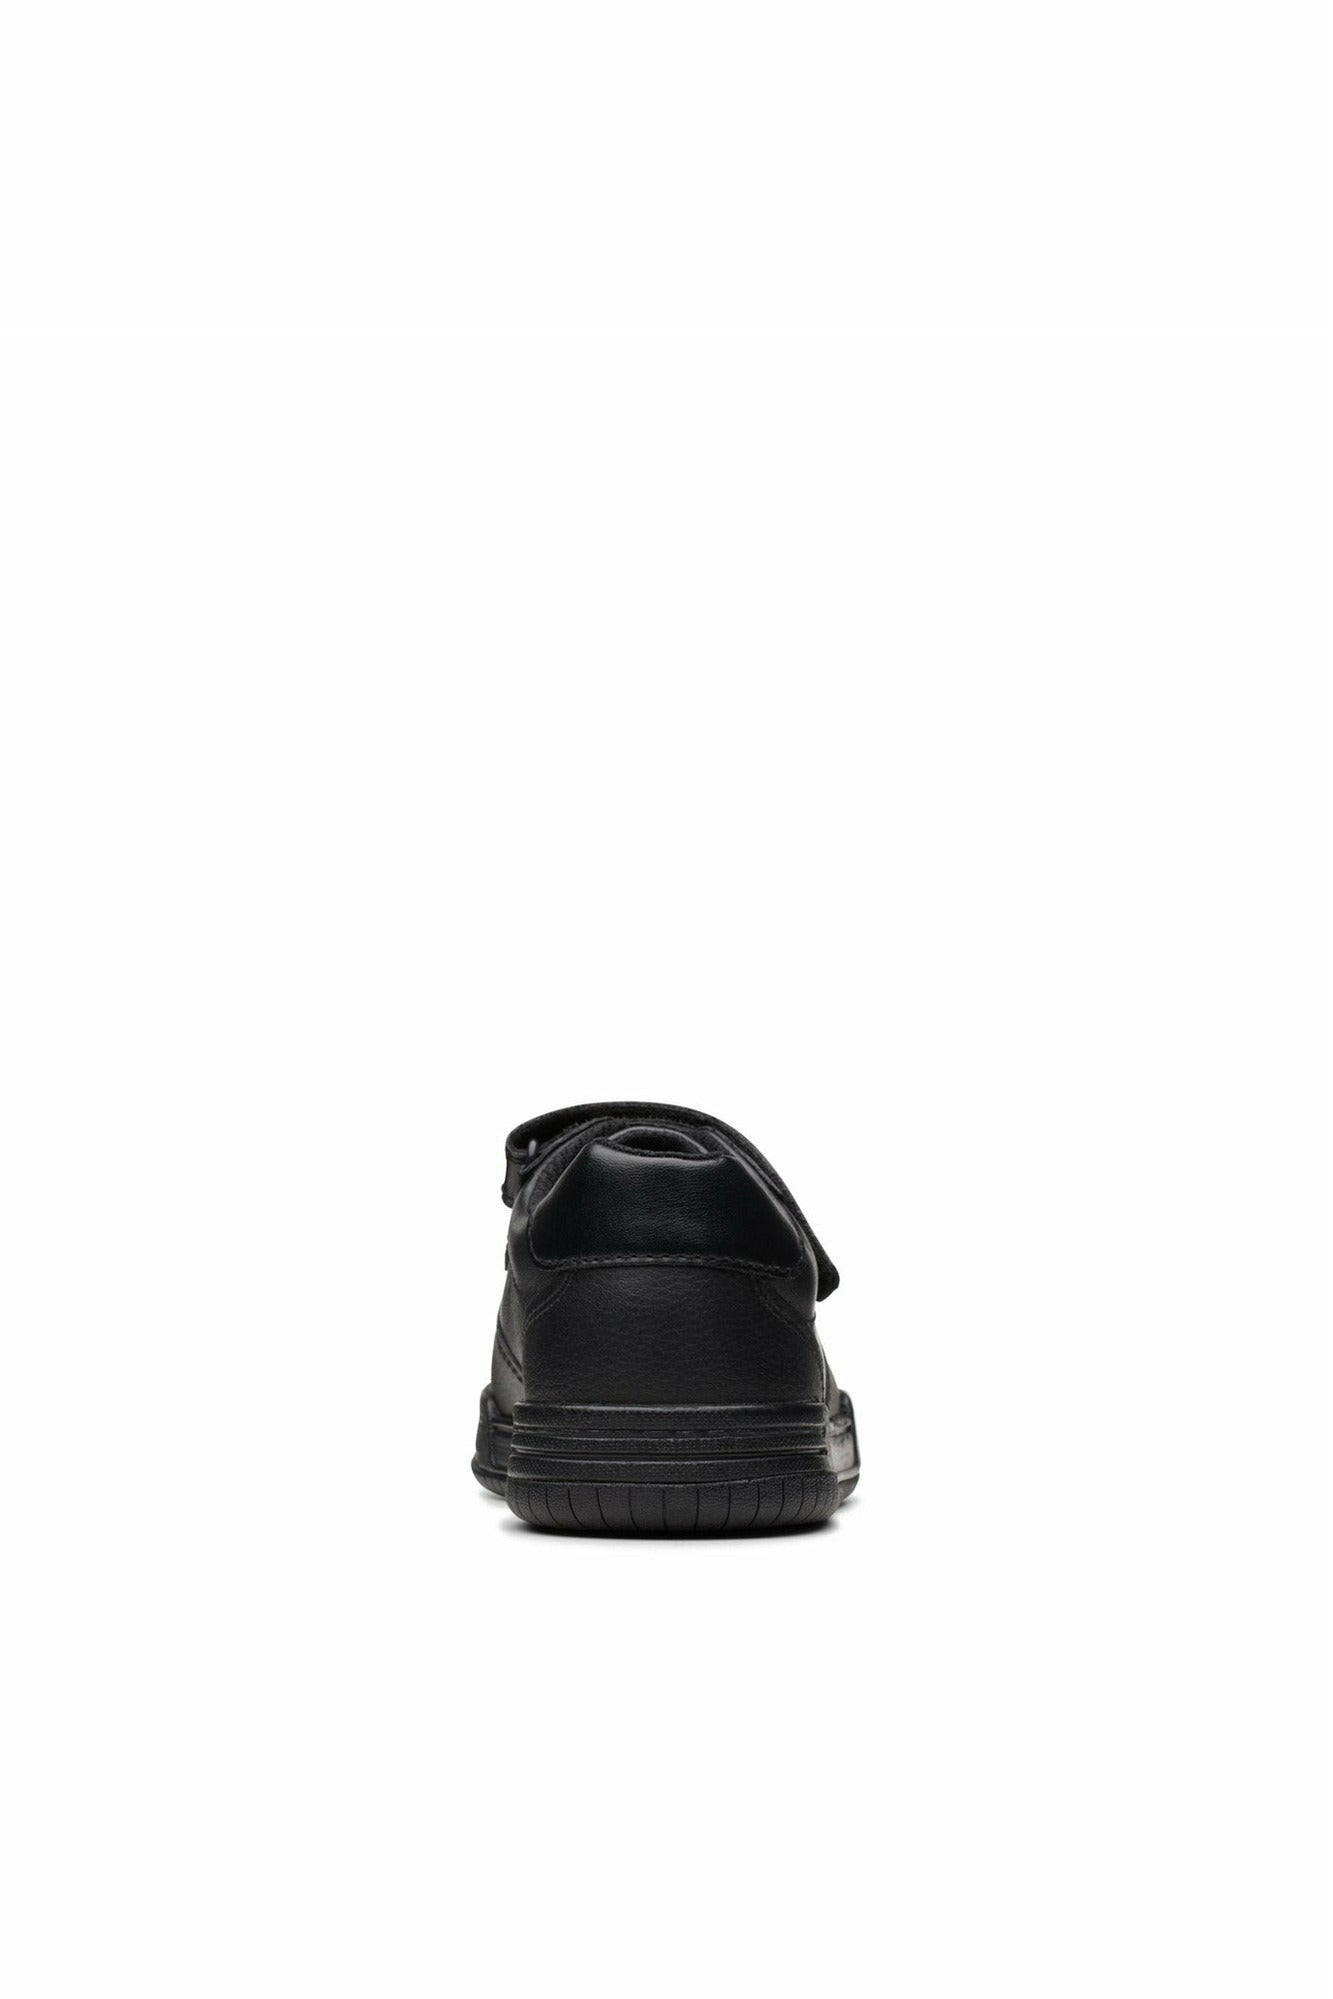 Clarks Fawn Lay K in black leather